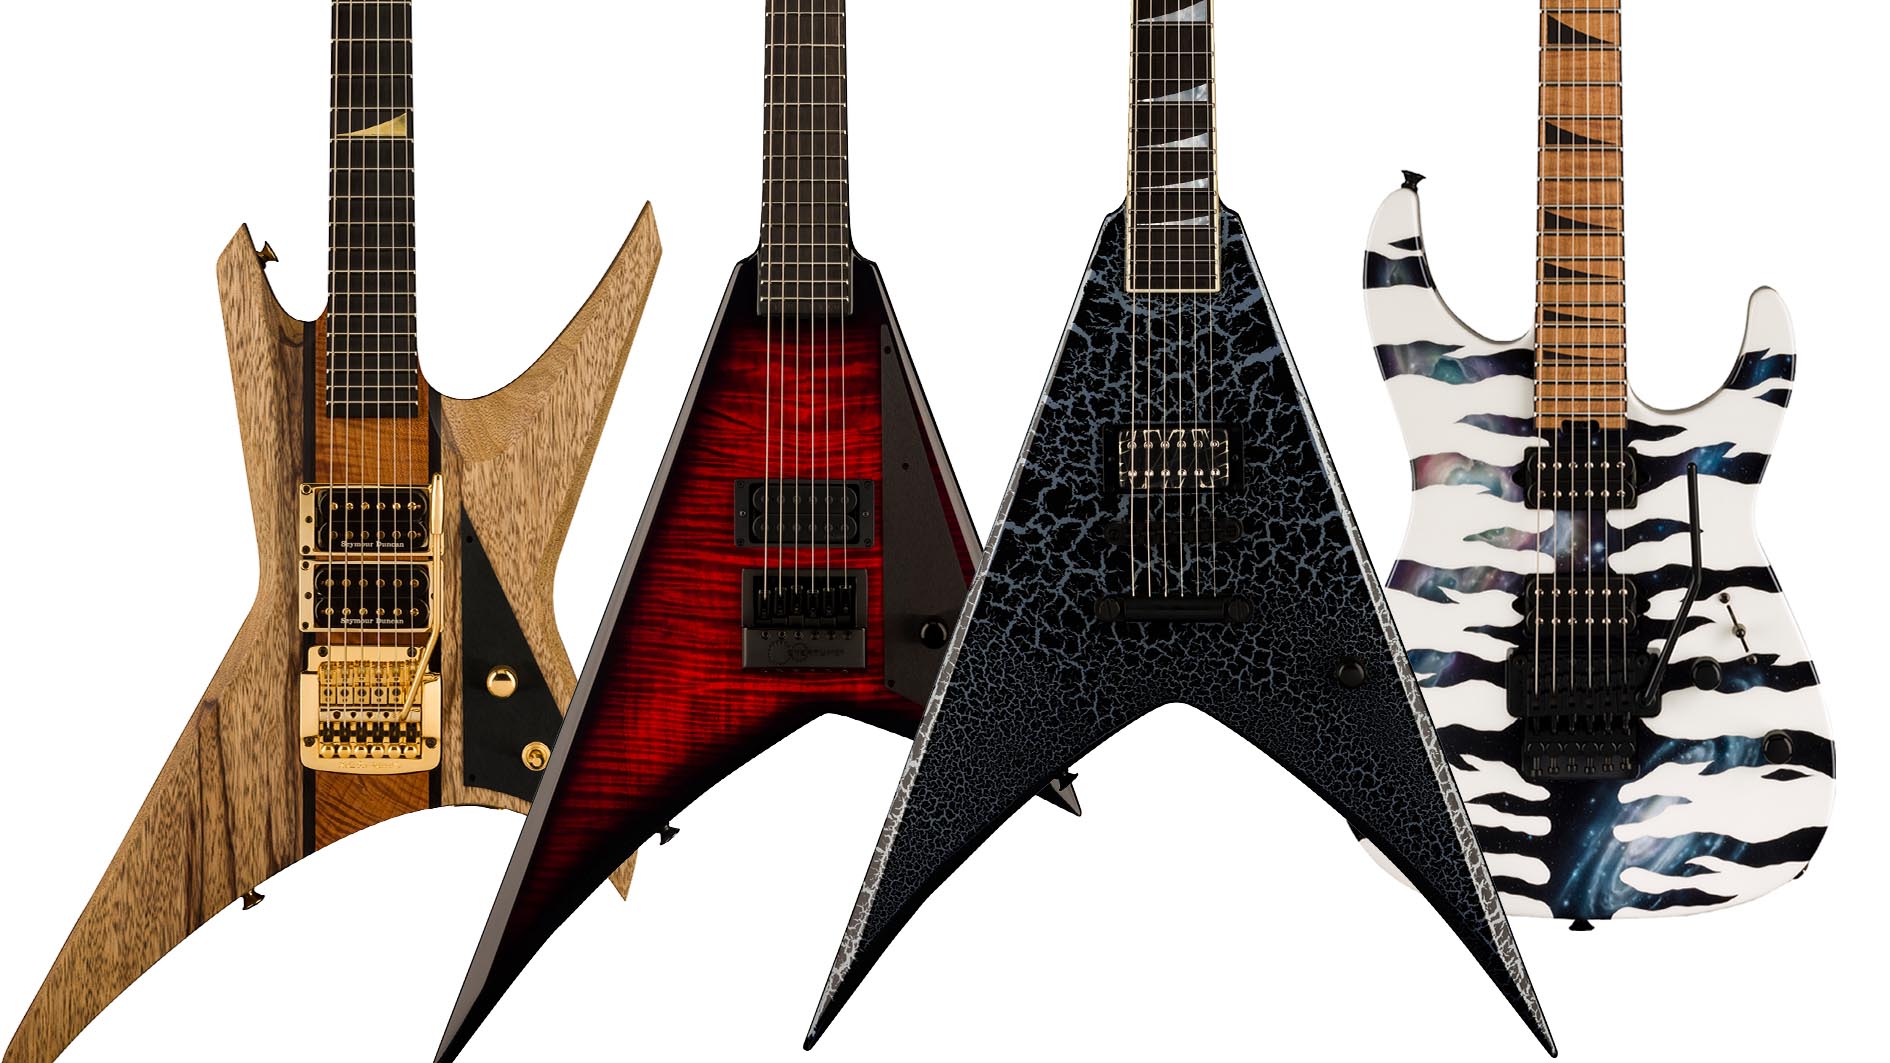 Jackson unveils four headspinning Masterbuilt electric guitars for